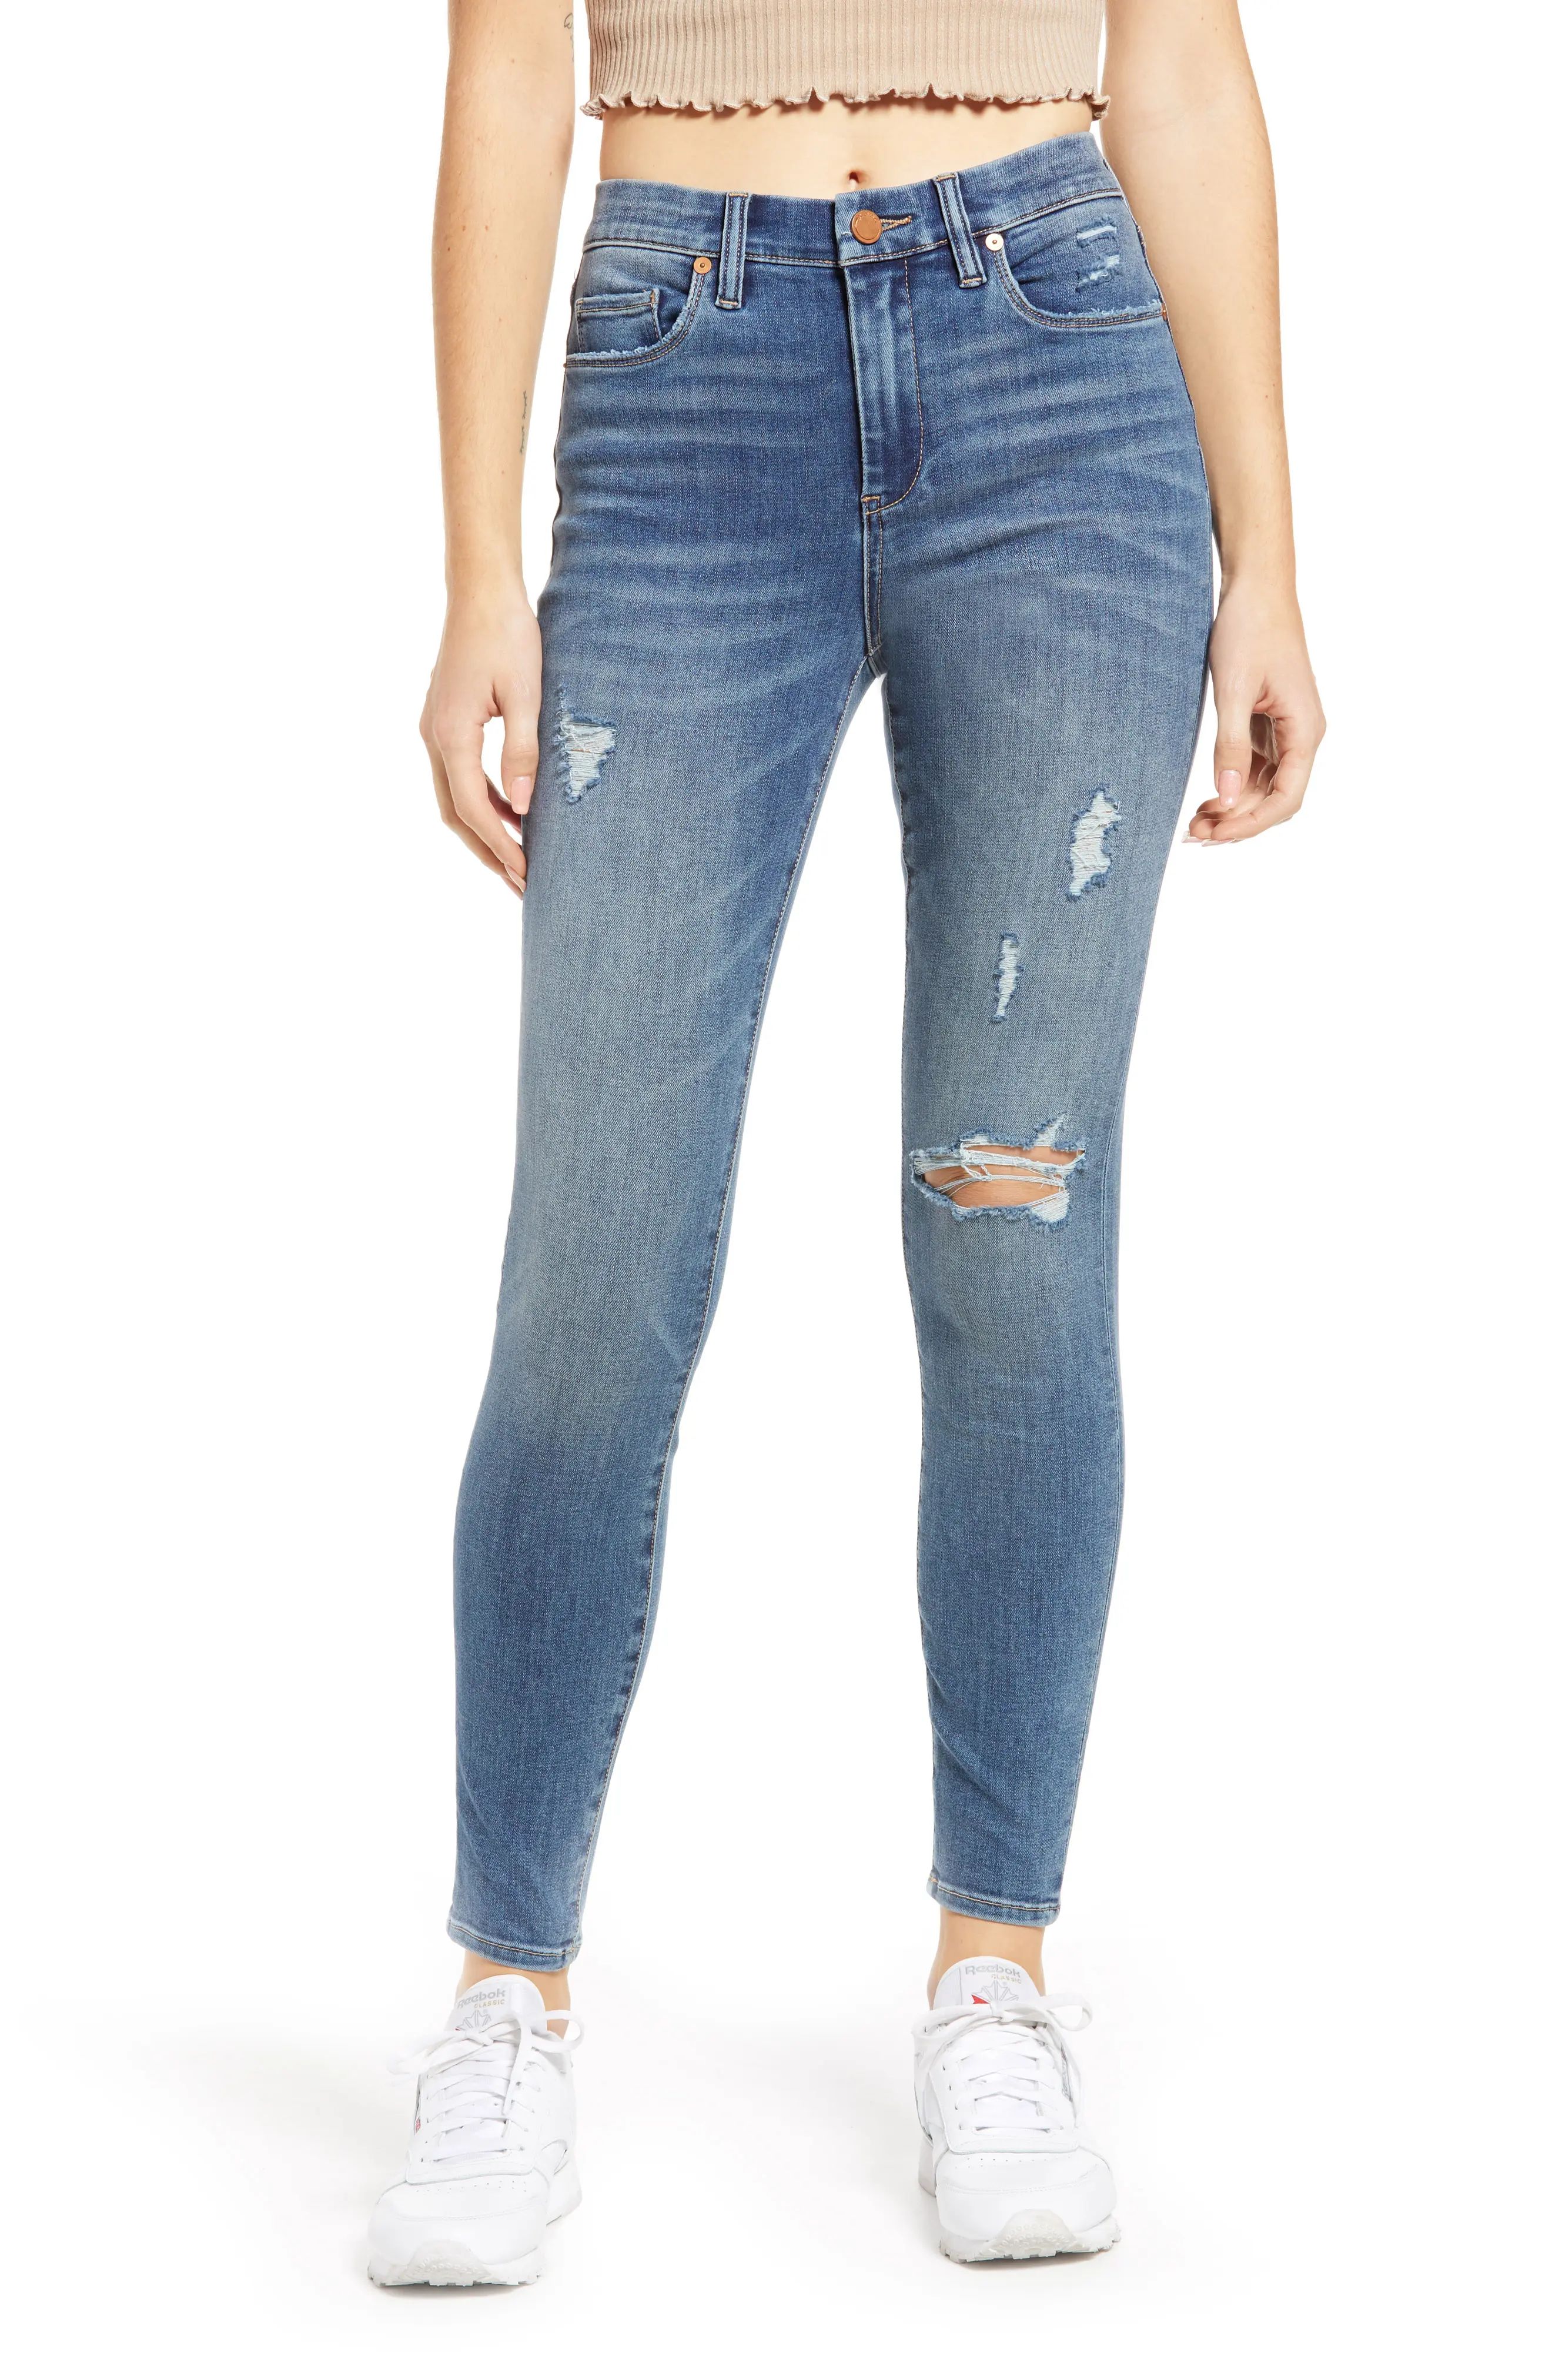 Women's Blanknyc The Bond Ripped Mid Rise Skinny Jeans, Size 28 - Blue | Nordstrom